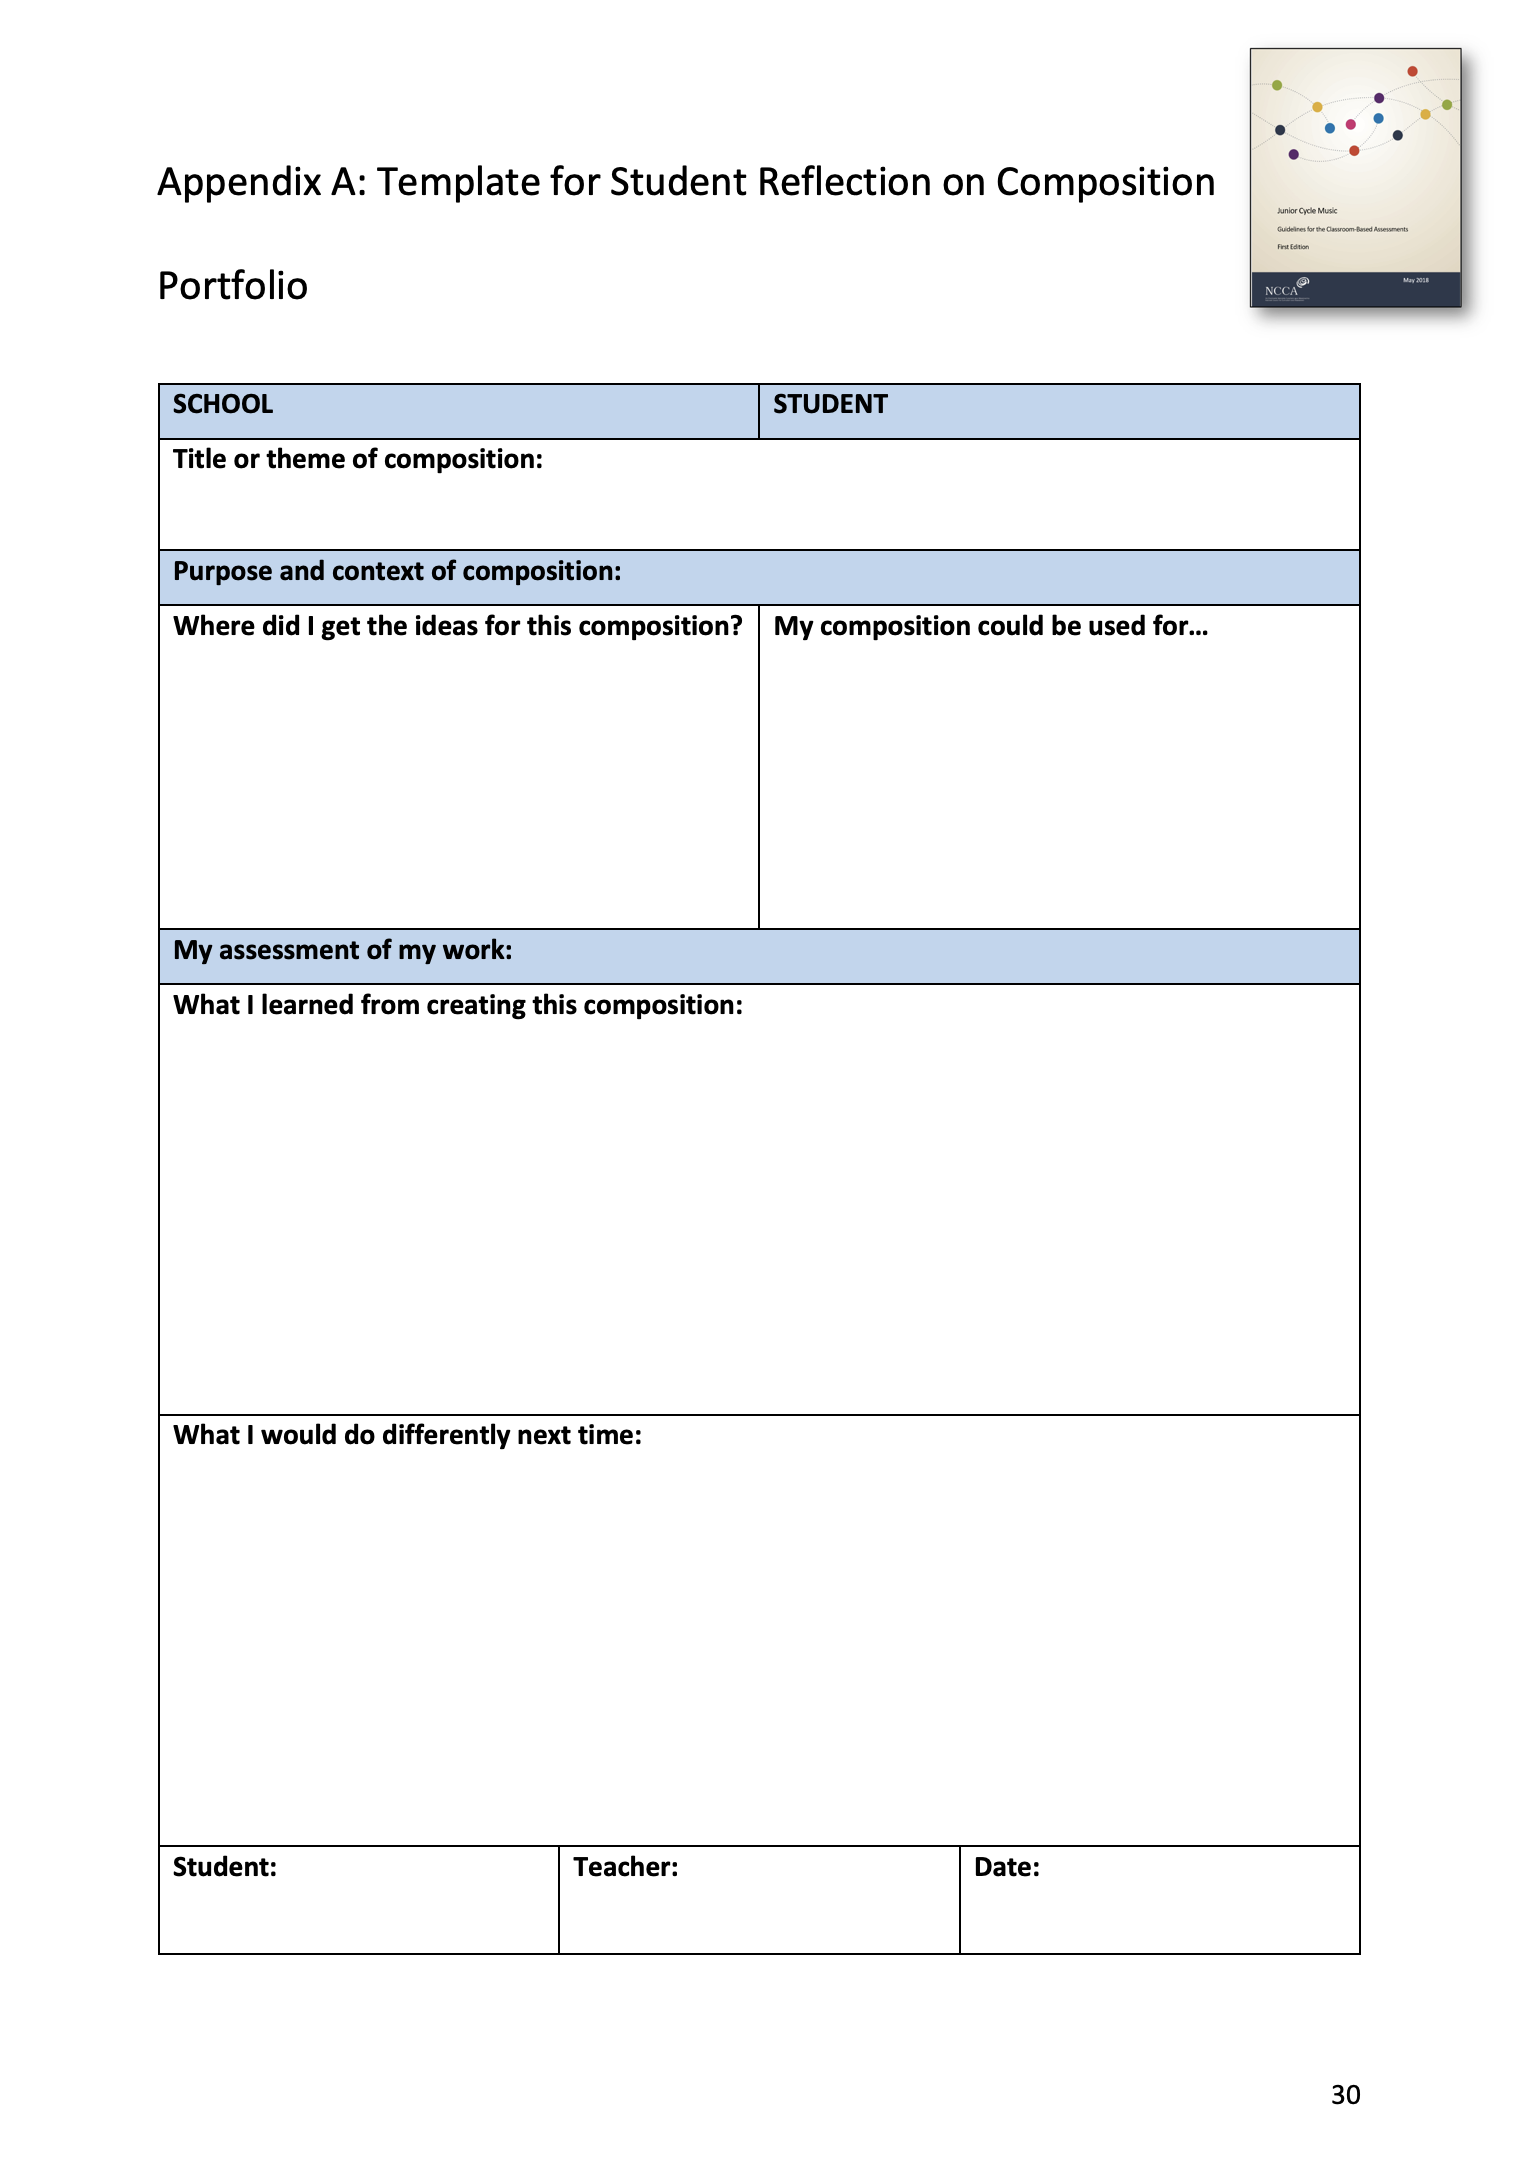 Template for Student Reflection for Composition Portfolio